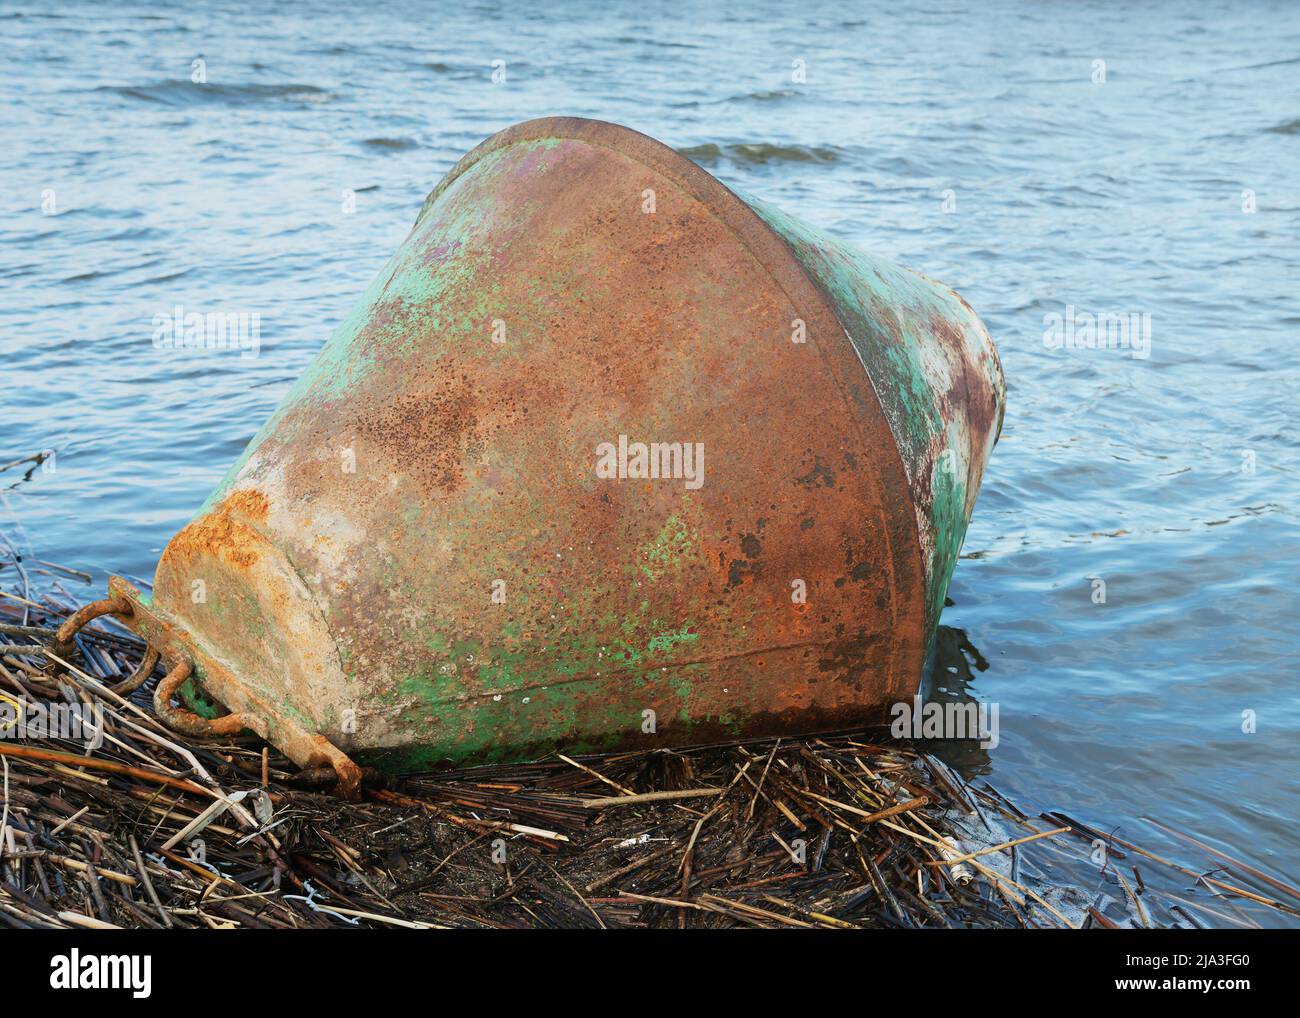 View of the water channel with a buoy. Stock Photo